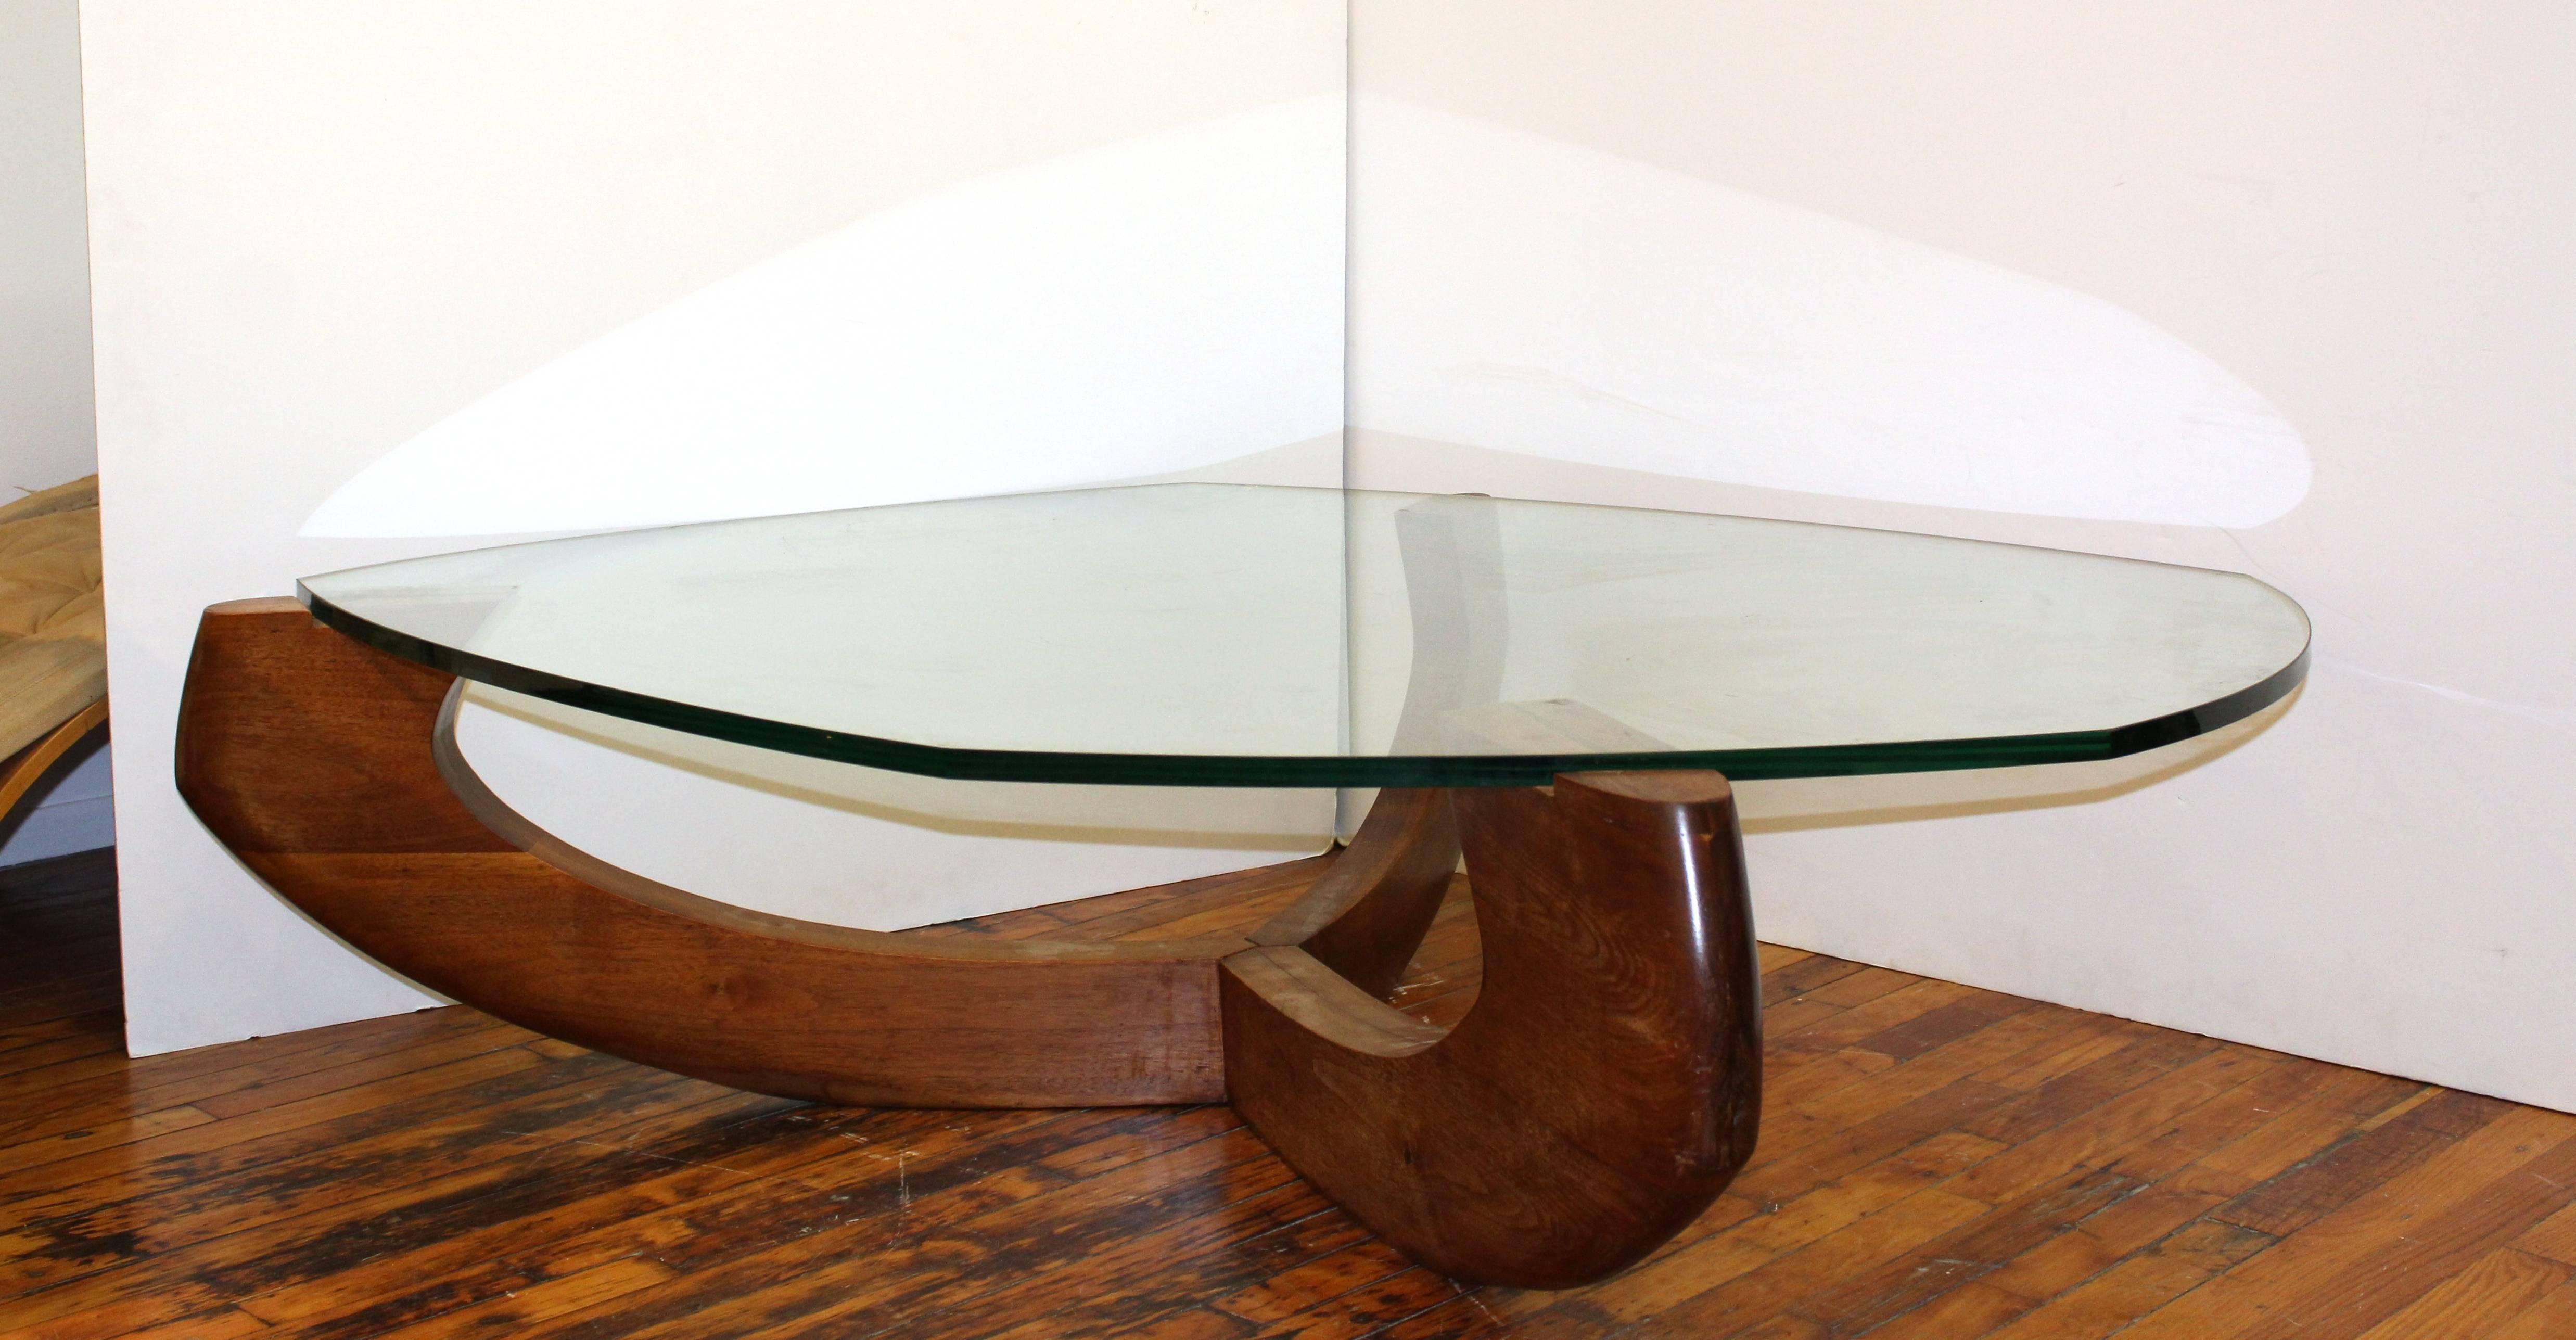 A large modern coffee table by Samson Berman. Organic shaped glass mounted onto a teak base. Despite some minor scratches to the glass the table is in good vintage condition.